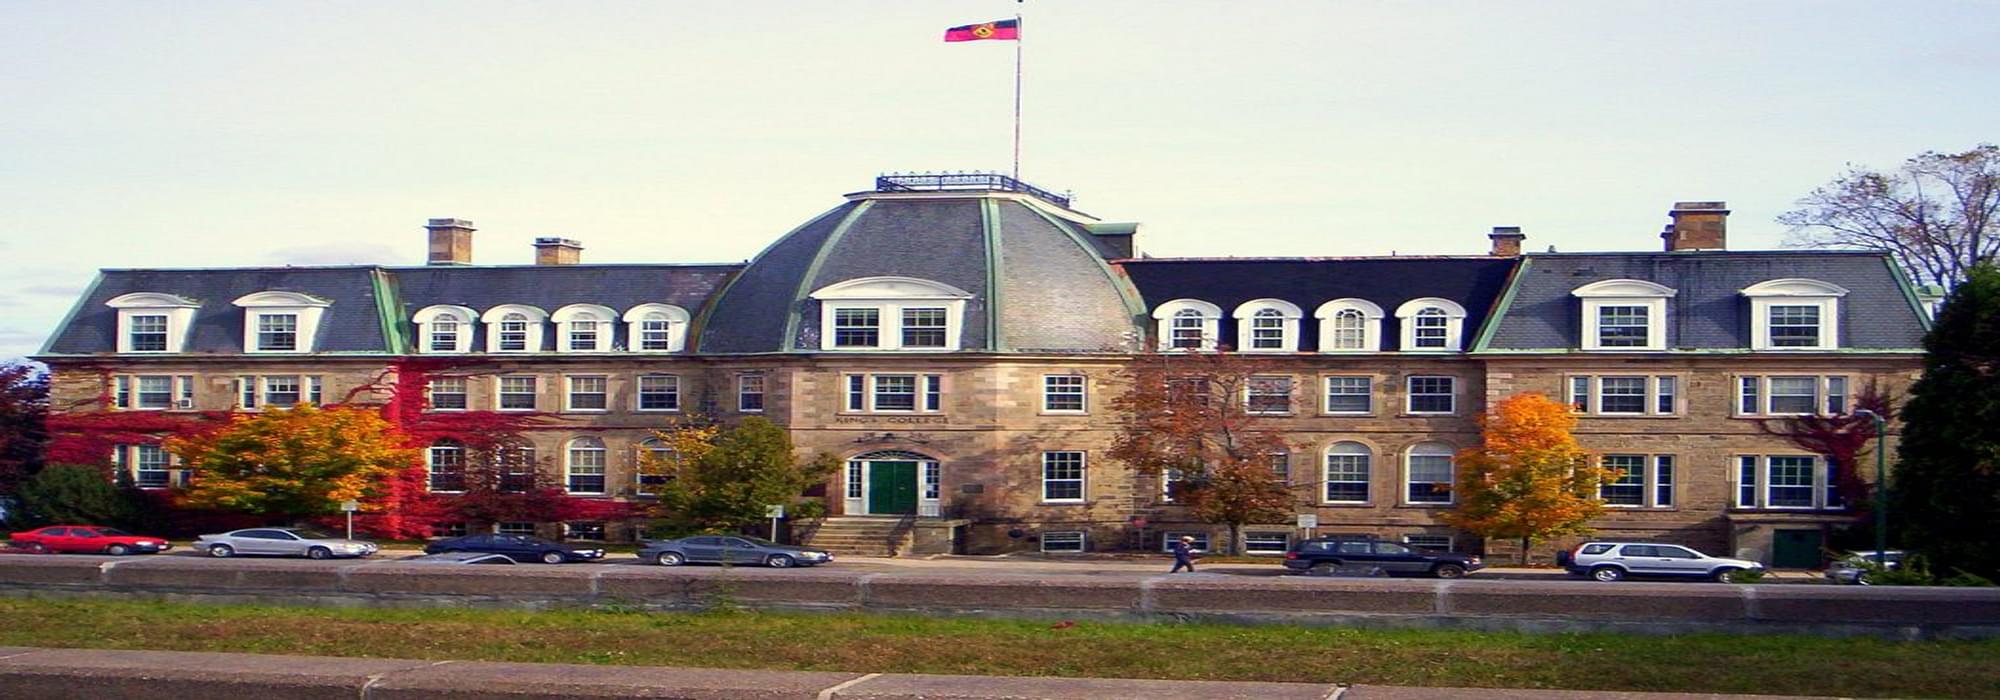 University of New Brunswick (Fredericton): Rankings, Courses, Admissions, Tuition  Fee, Cost of Attendance & Scholarships